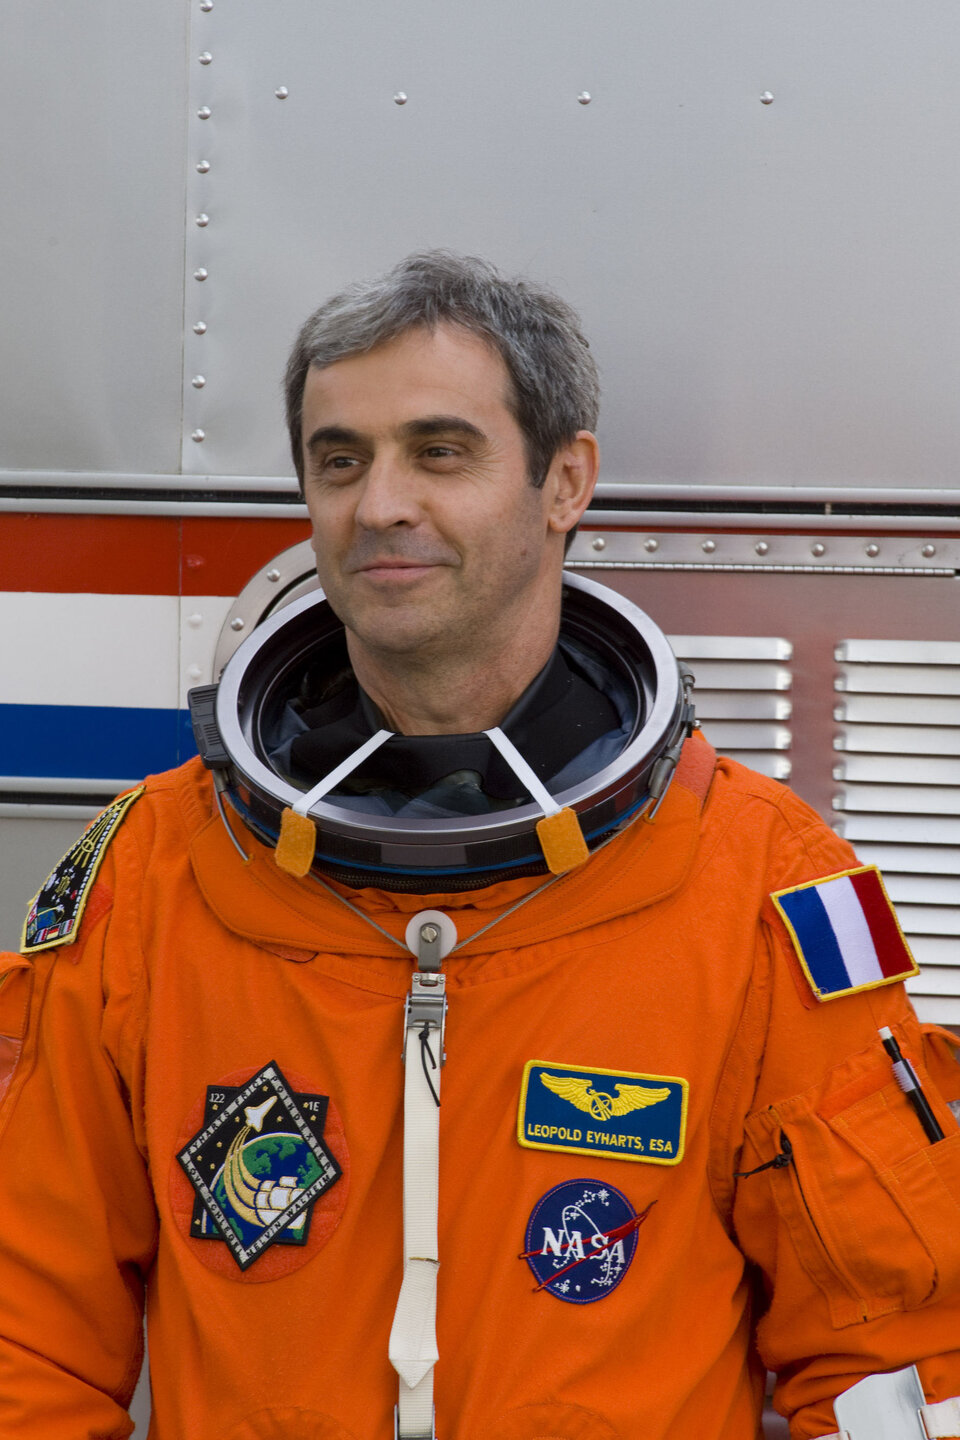 Léopold Eyharts is due to remain on board the station after STS-122 returns